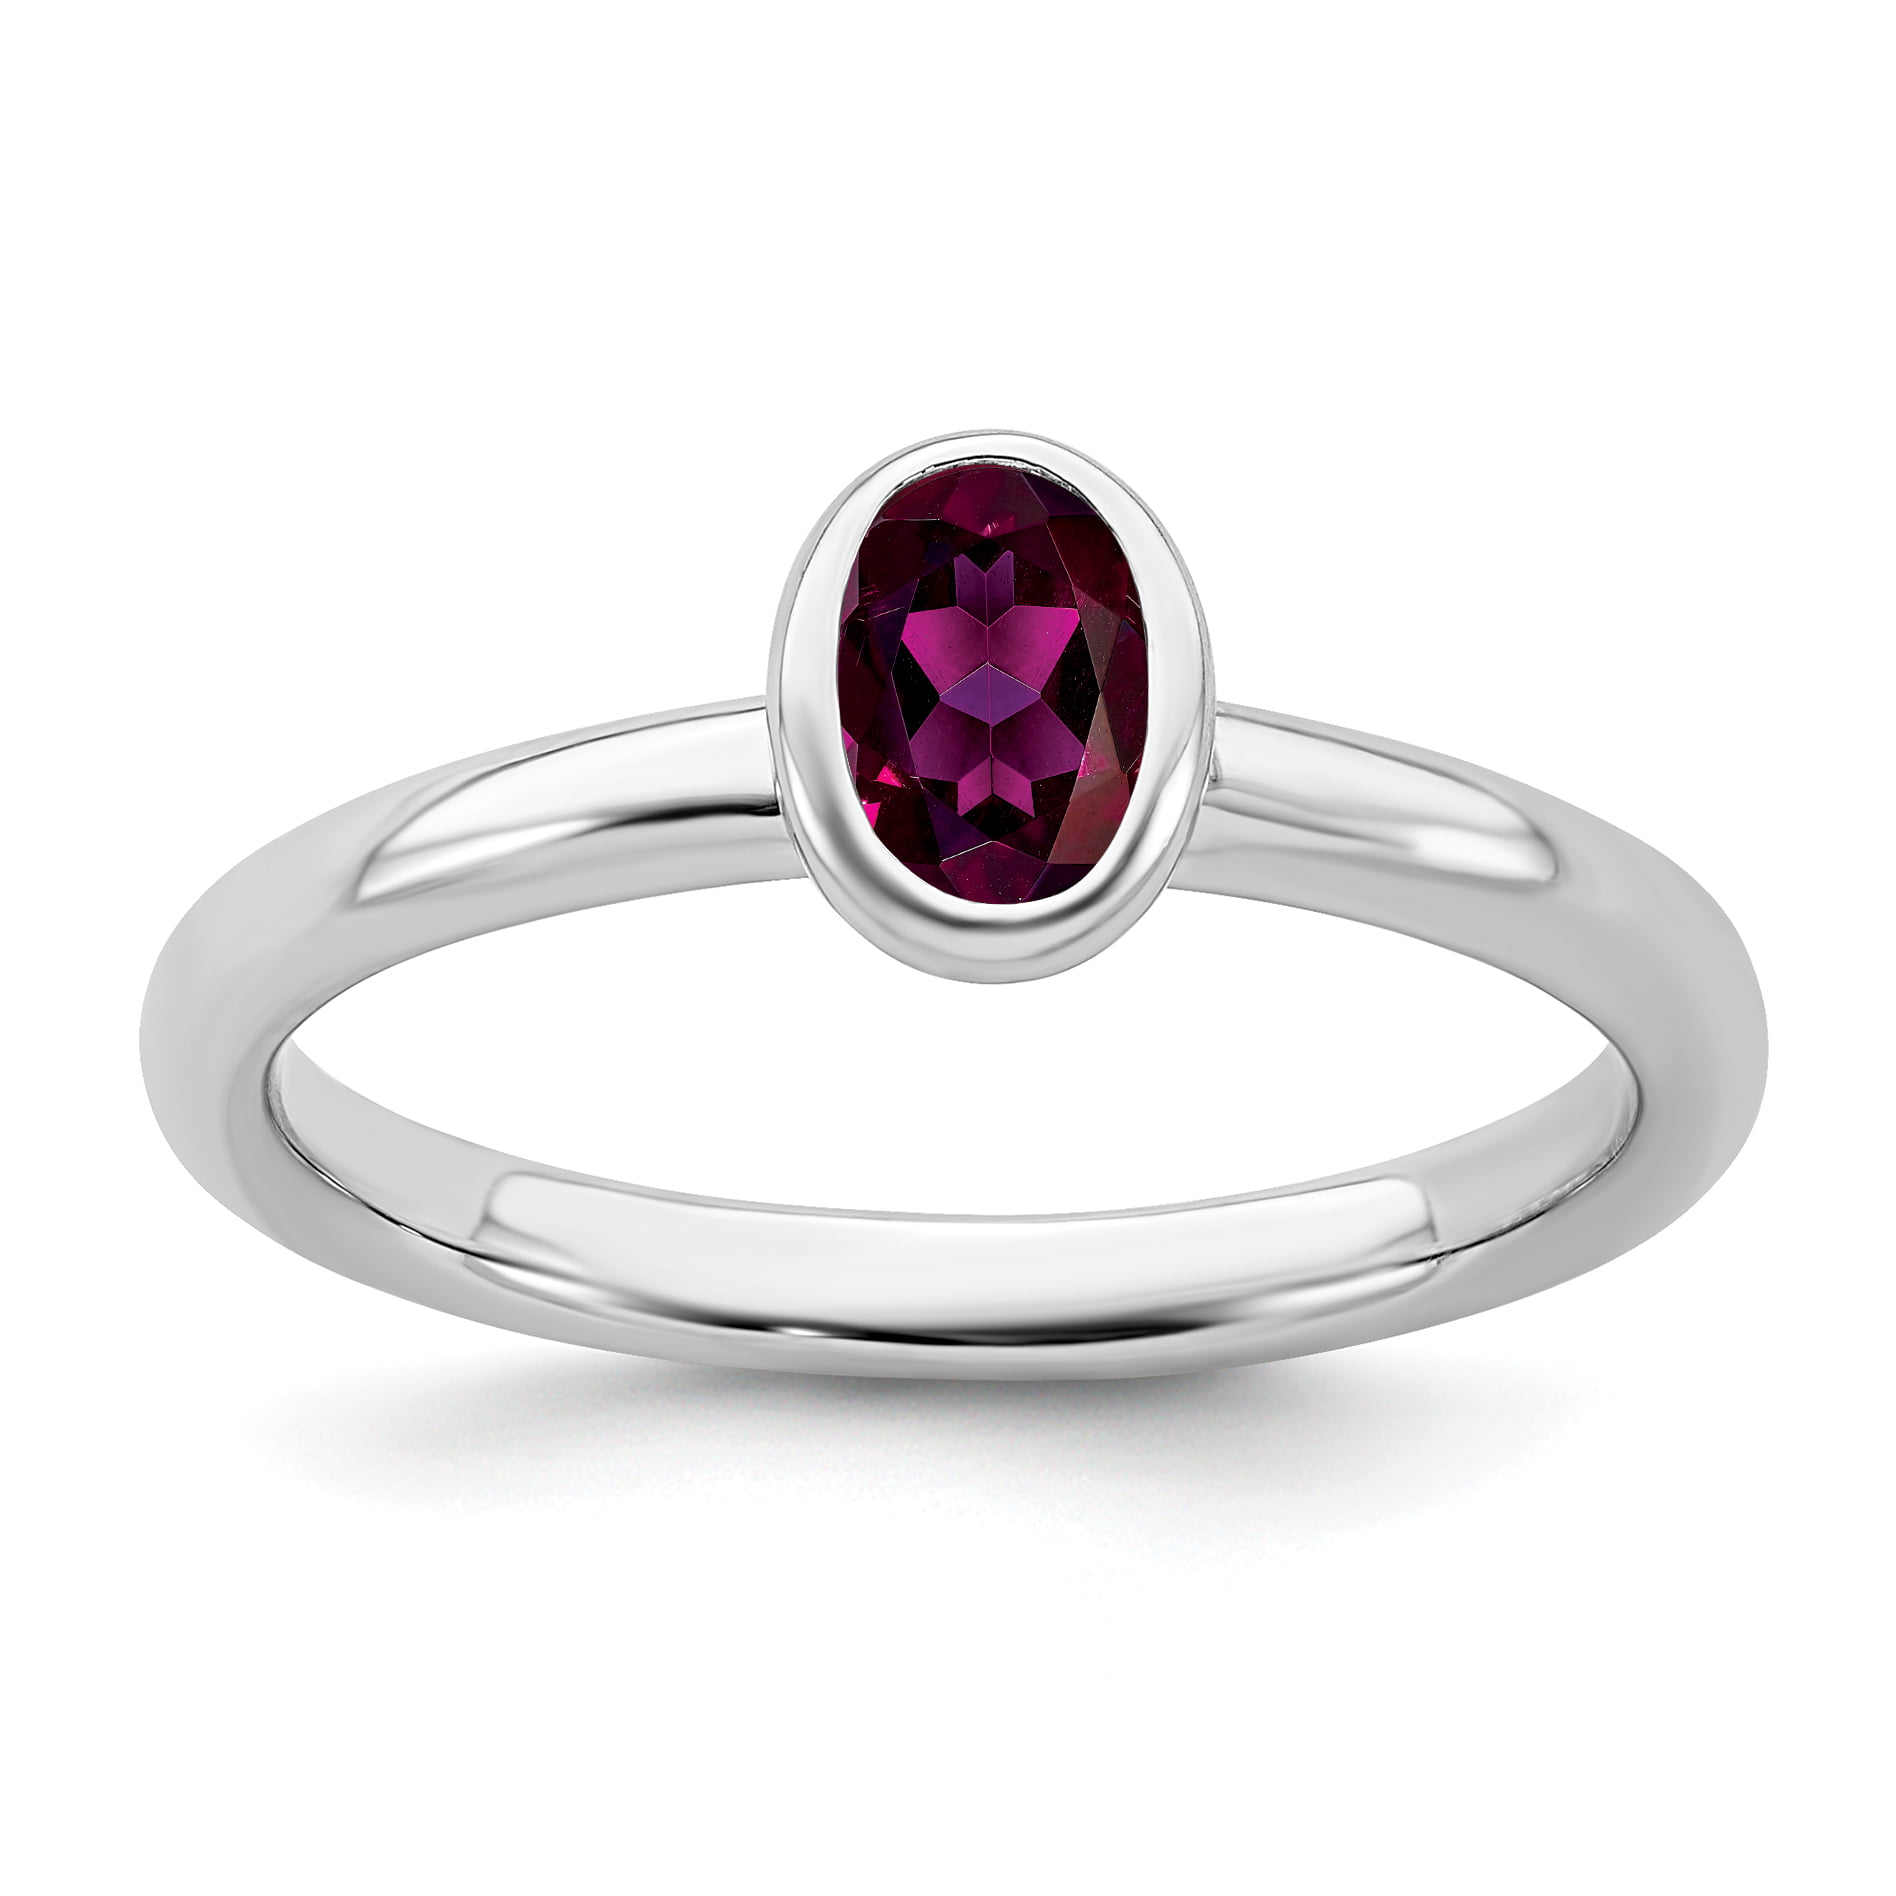 Details about   GENUINE RHODOLITE GARNET RING 925 STERLING SILVER size 5 FAST FREE SHIPPING !!